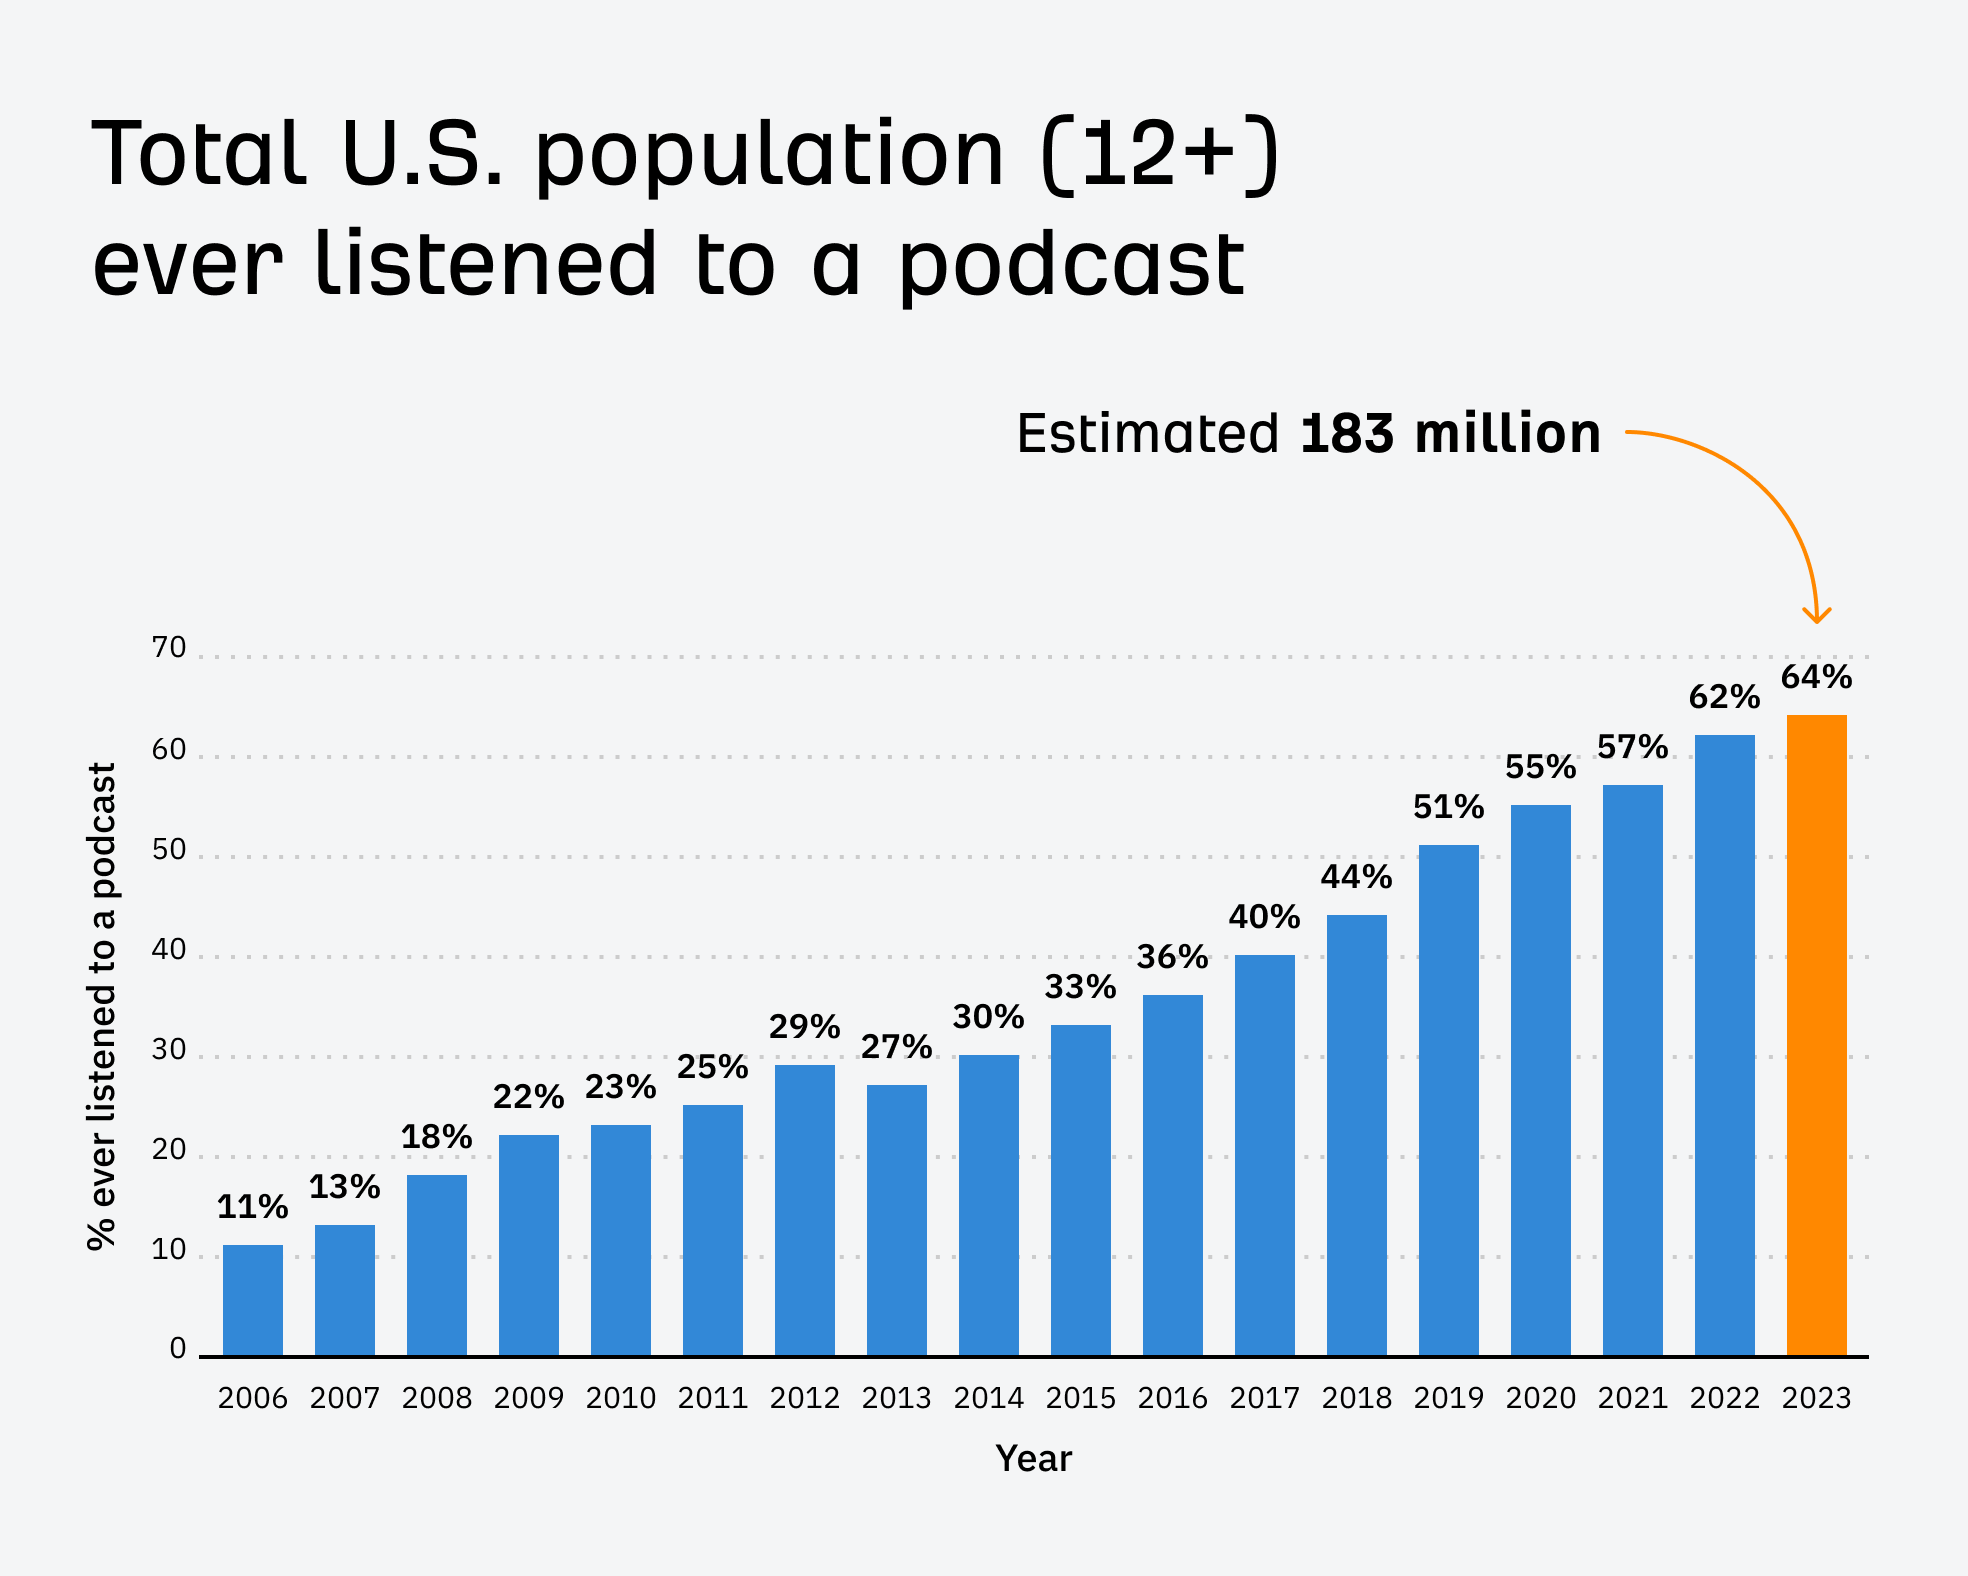 Chart: 64% of Americans listened to a podcast as of 2023 (a 2 percentage points increase from last year).